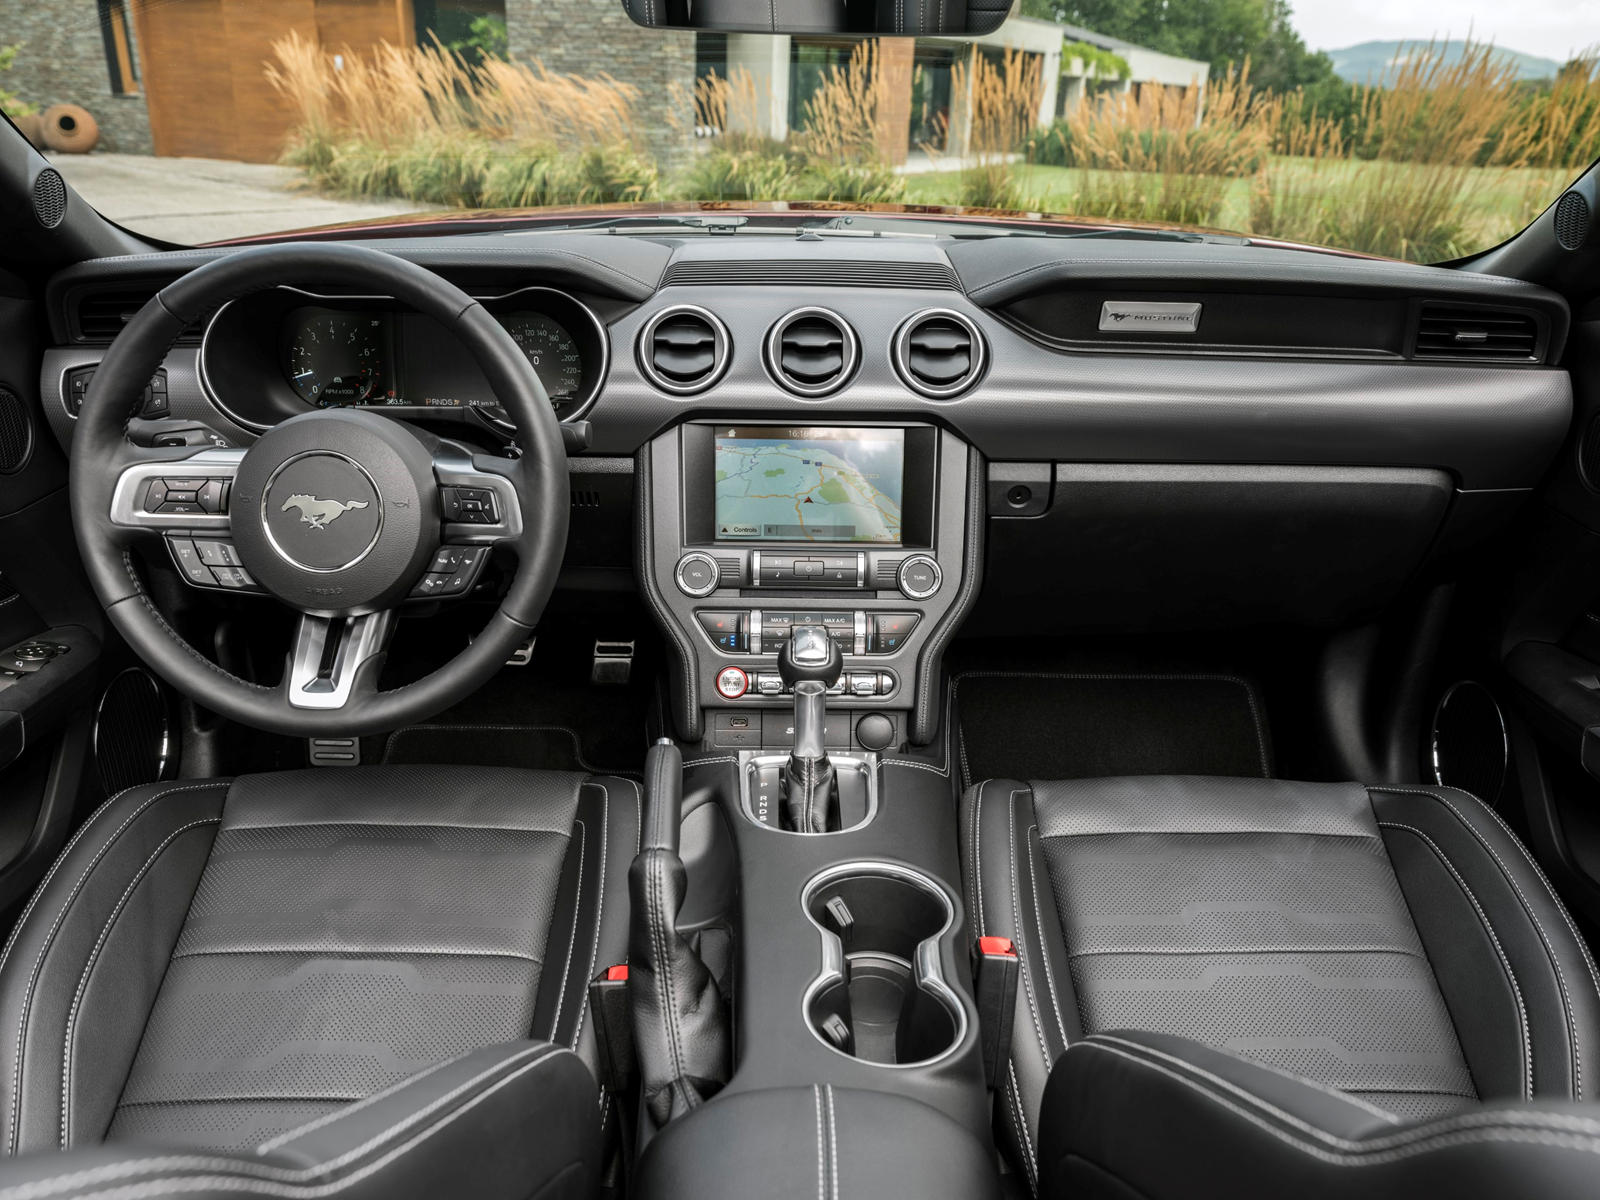 2022 Ford Mustang Convertible Dashboard